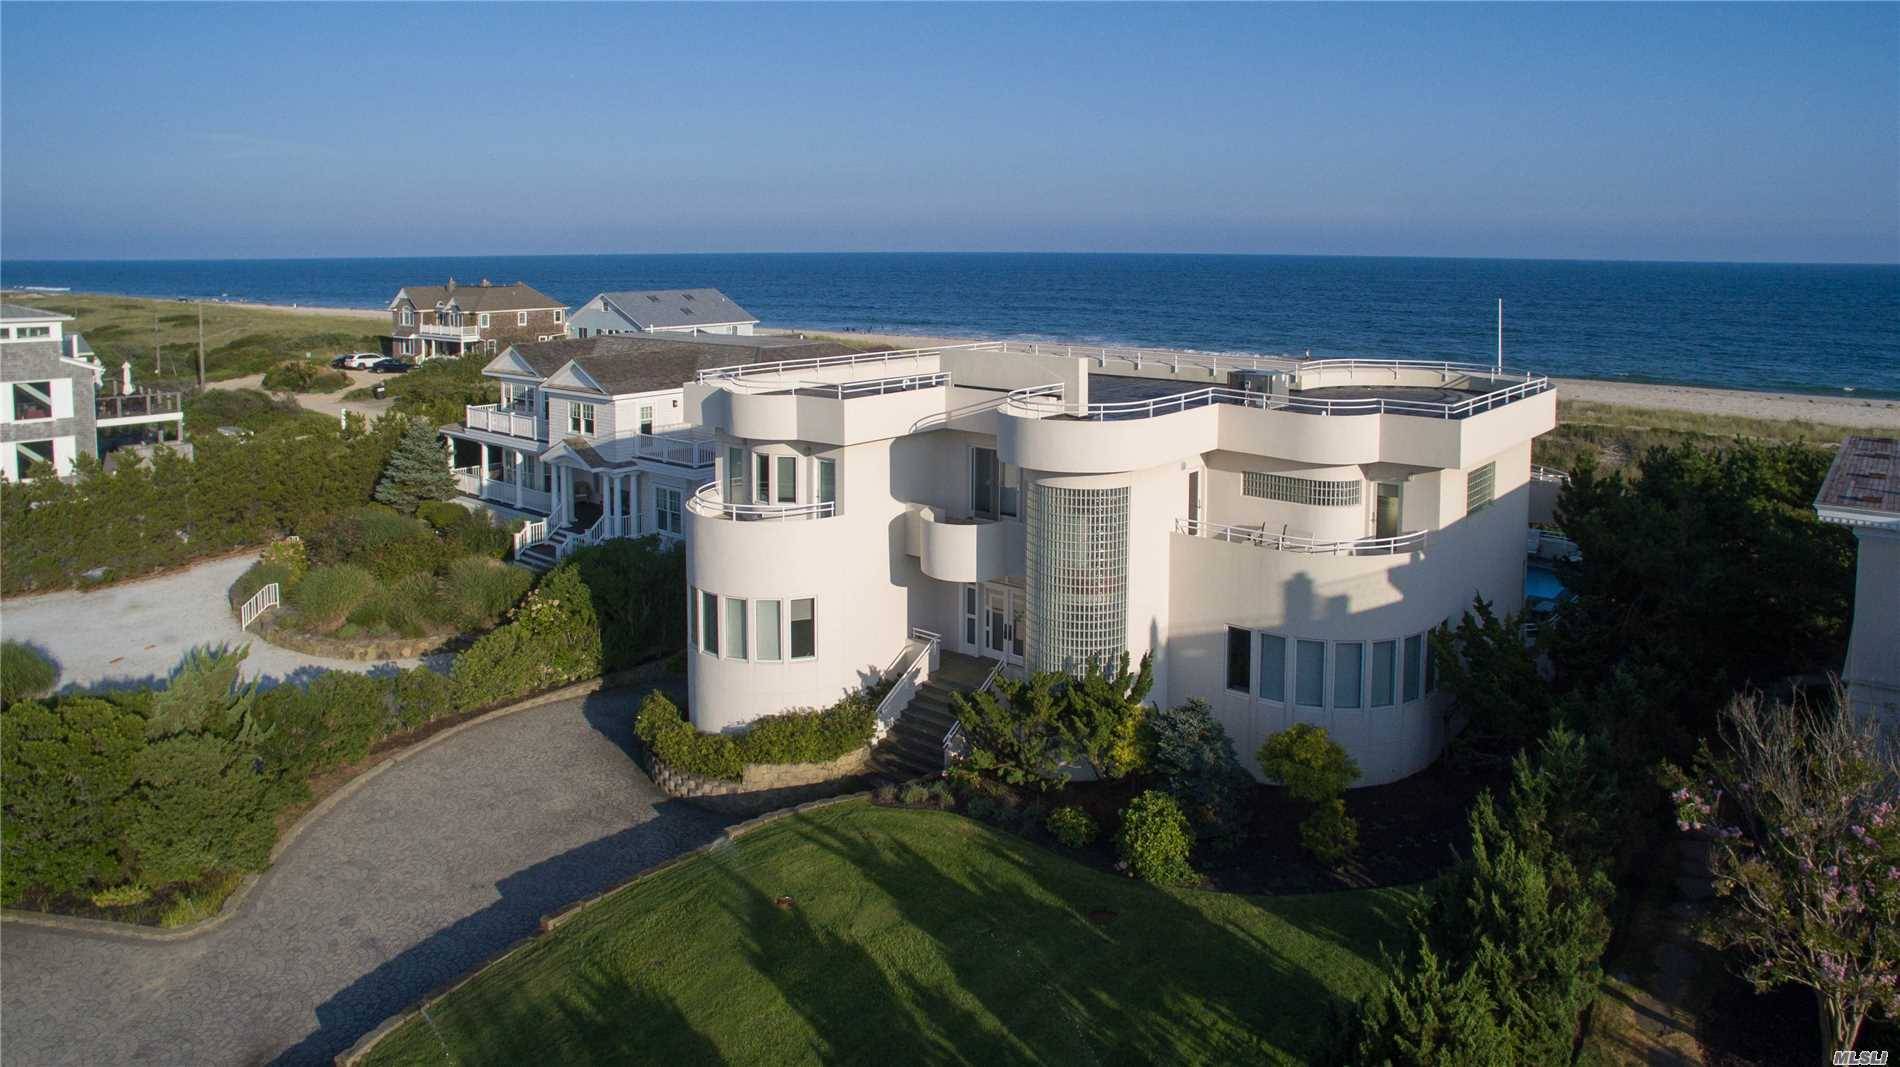 Situated On 1. 65 Acres Of Oceanfront, This Five Bedroom, Six Bath Estate Offers Breathtaking Views Throughout As Well As An Abundance Of Amenities.